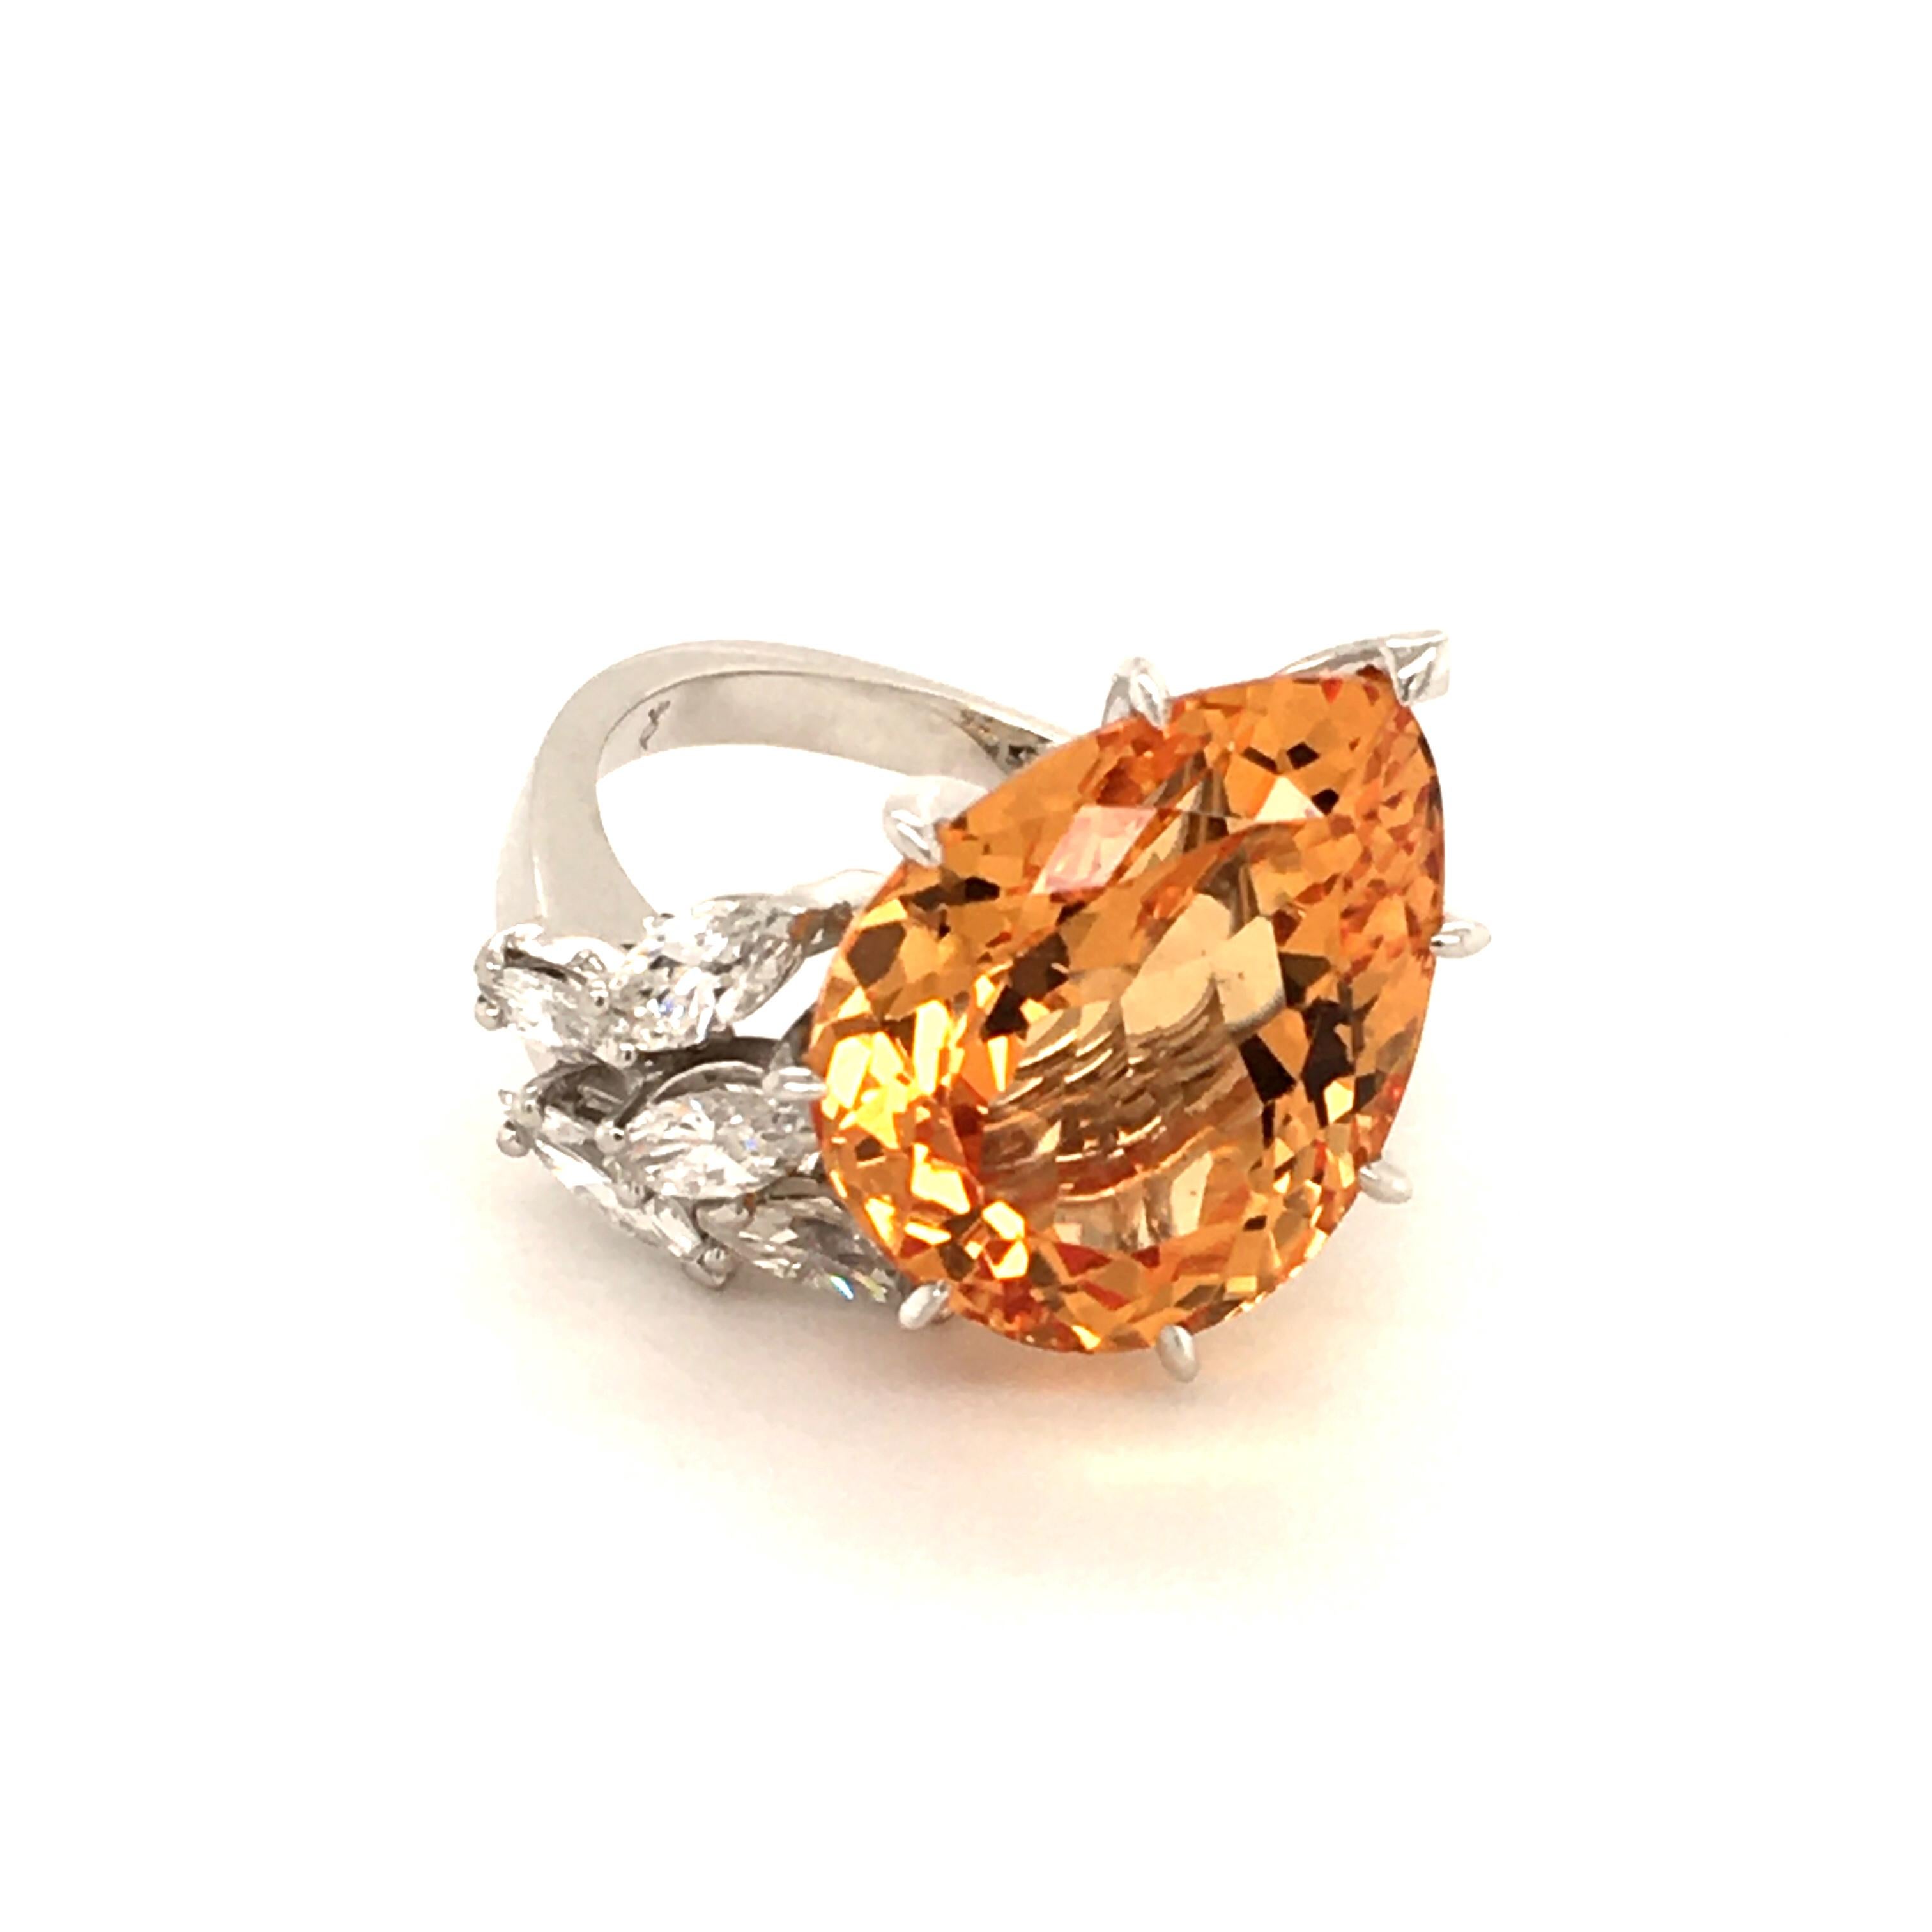 Amazing ring in white gold 750, prong set with following gemstones:

1  beautiful clean imperial topaz of yellowish orange colour, pearshape, approx. 11 ct
5 marquise cut diamonds totaling approx. 0.60 ct of G/H-vs quality

Ring size: 54 (EU) / 7